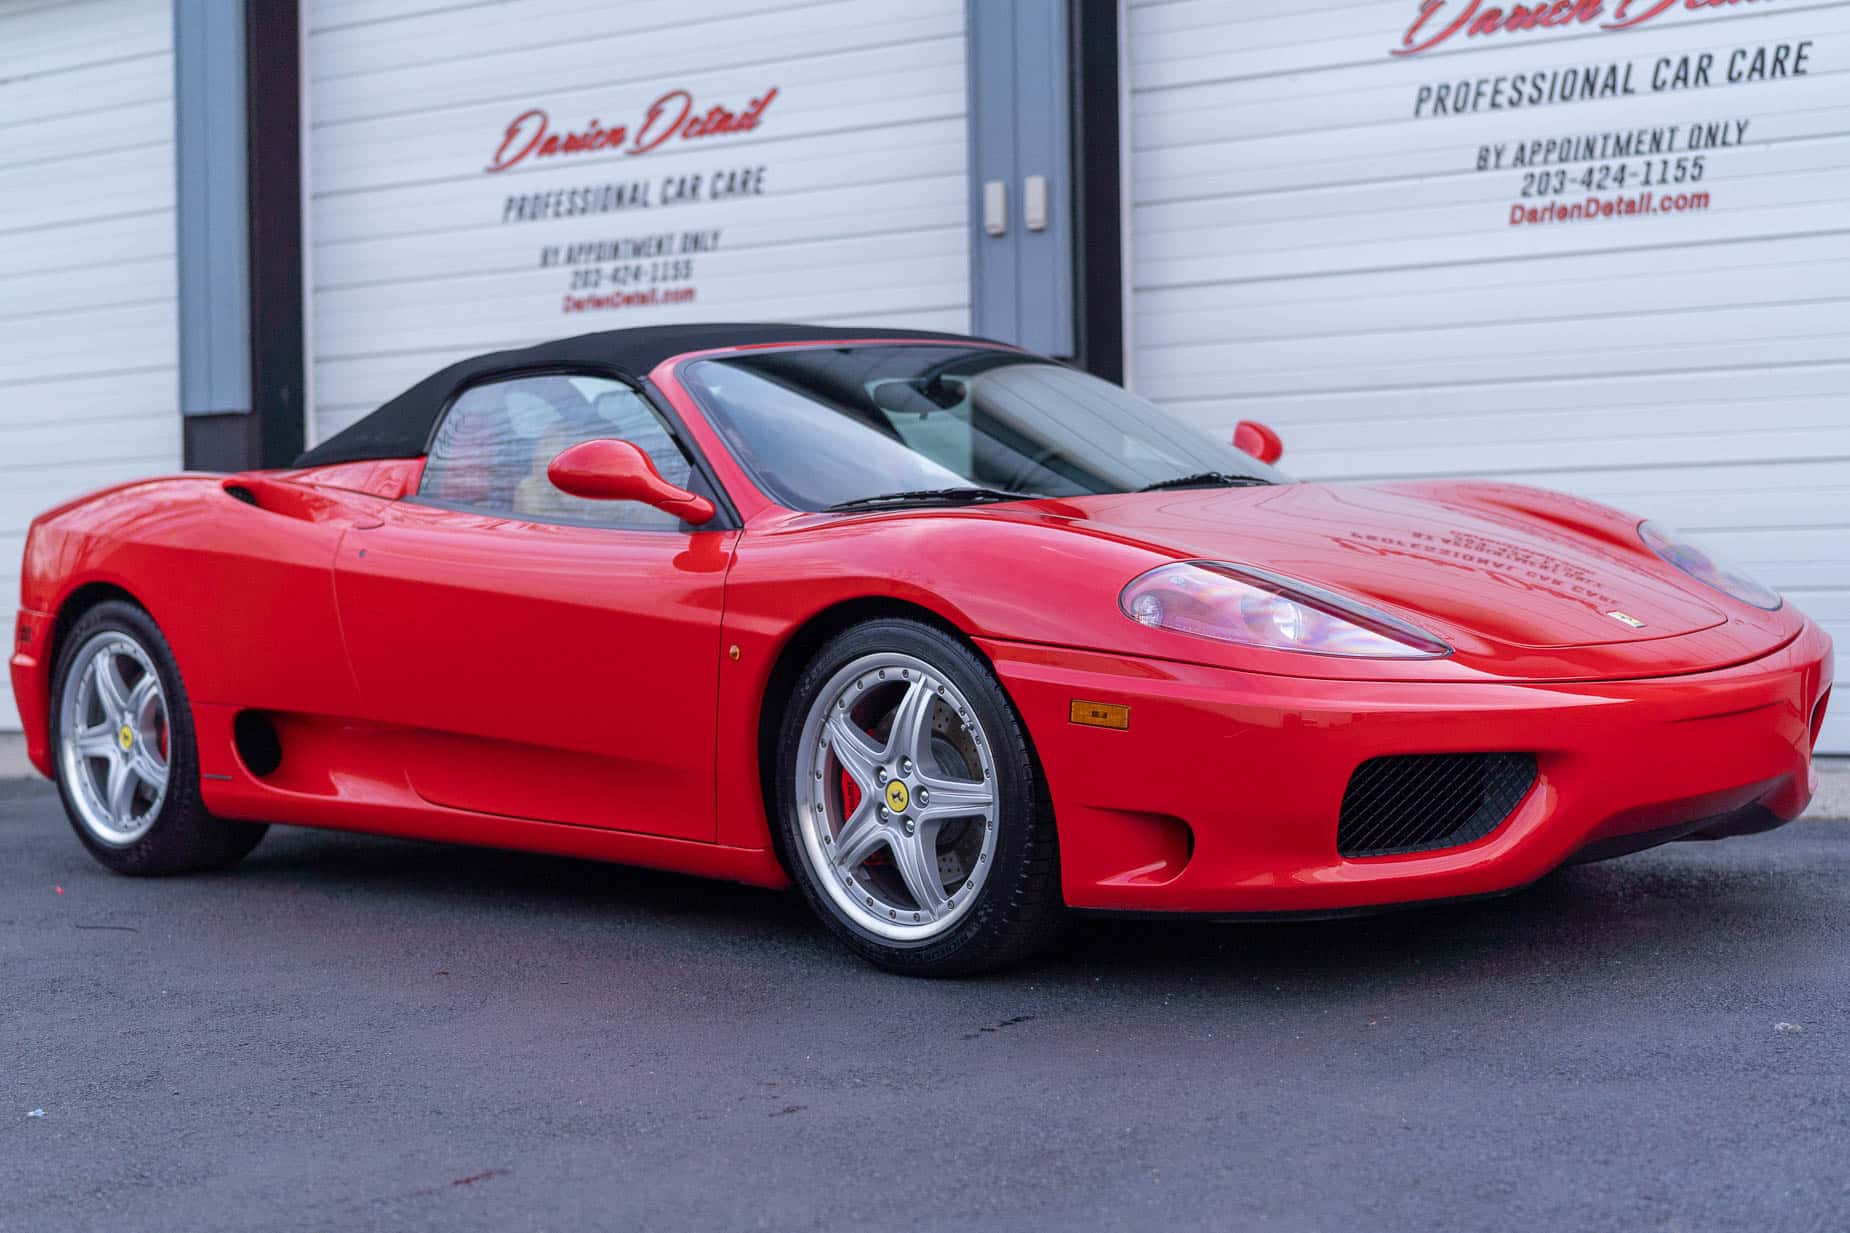 2003 Ferrari 360 Spider Rosso Corsa 3 Piece Wheels Red Calipers Convertiblexpel Paint Protection Film Ppf Ceramic Coating 08